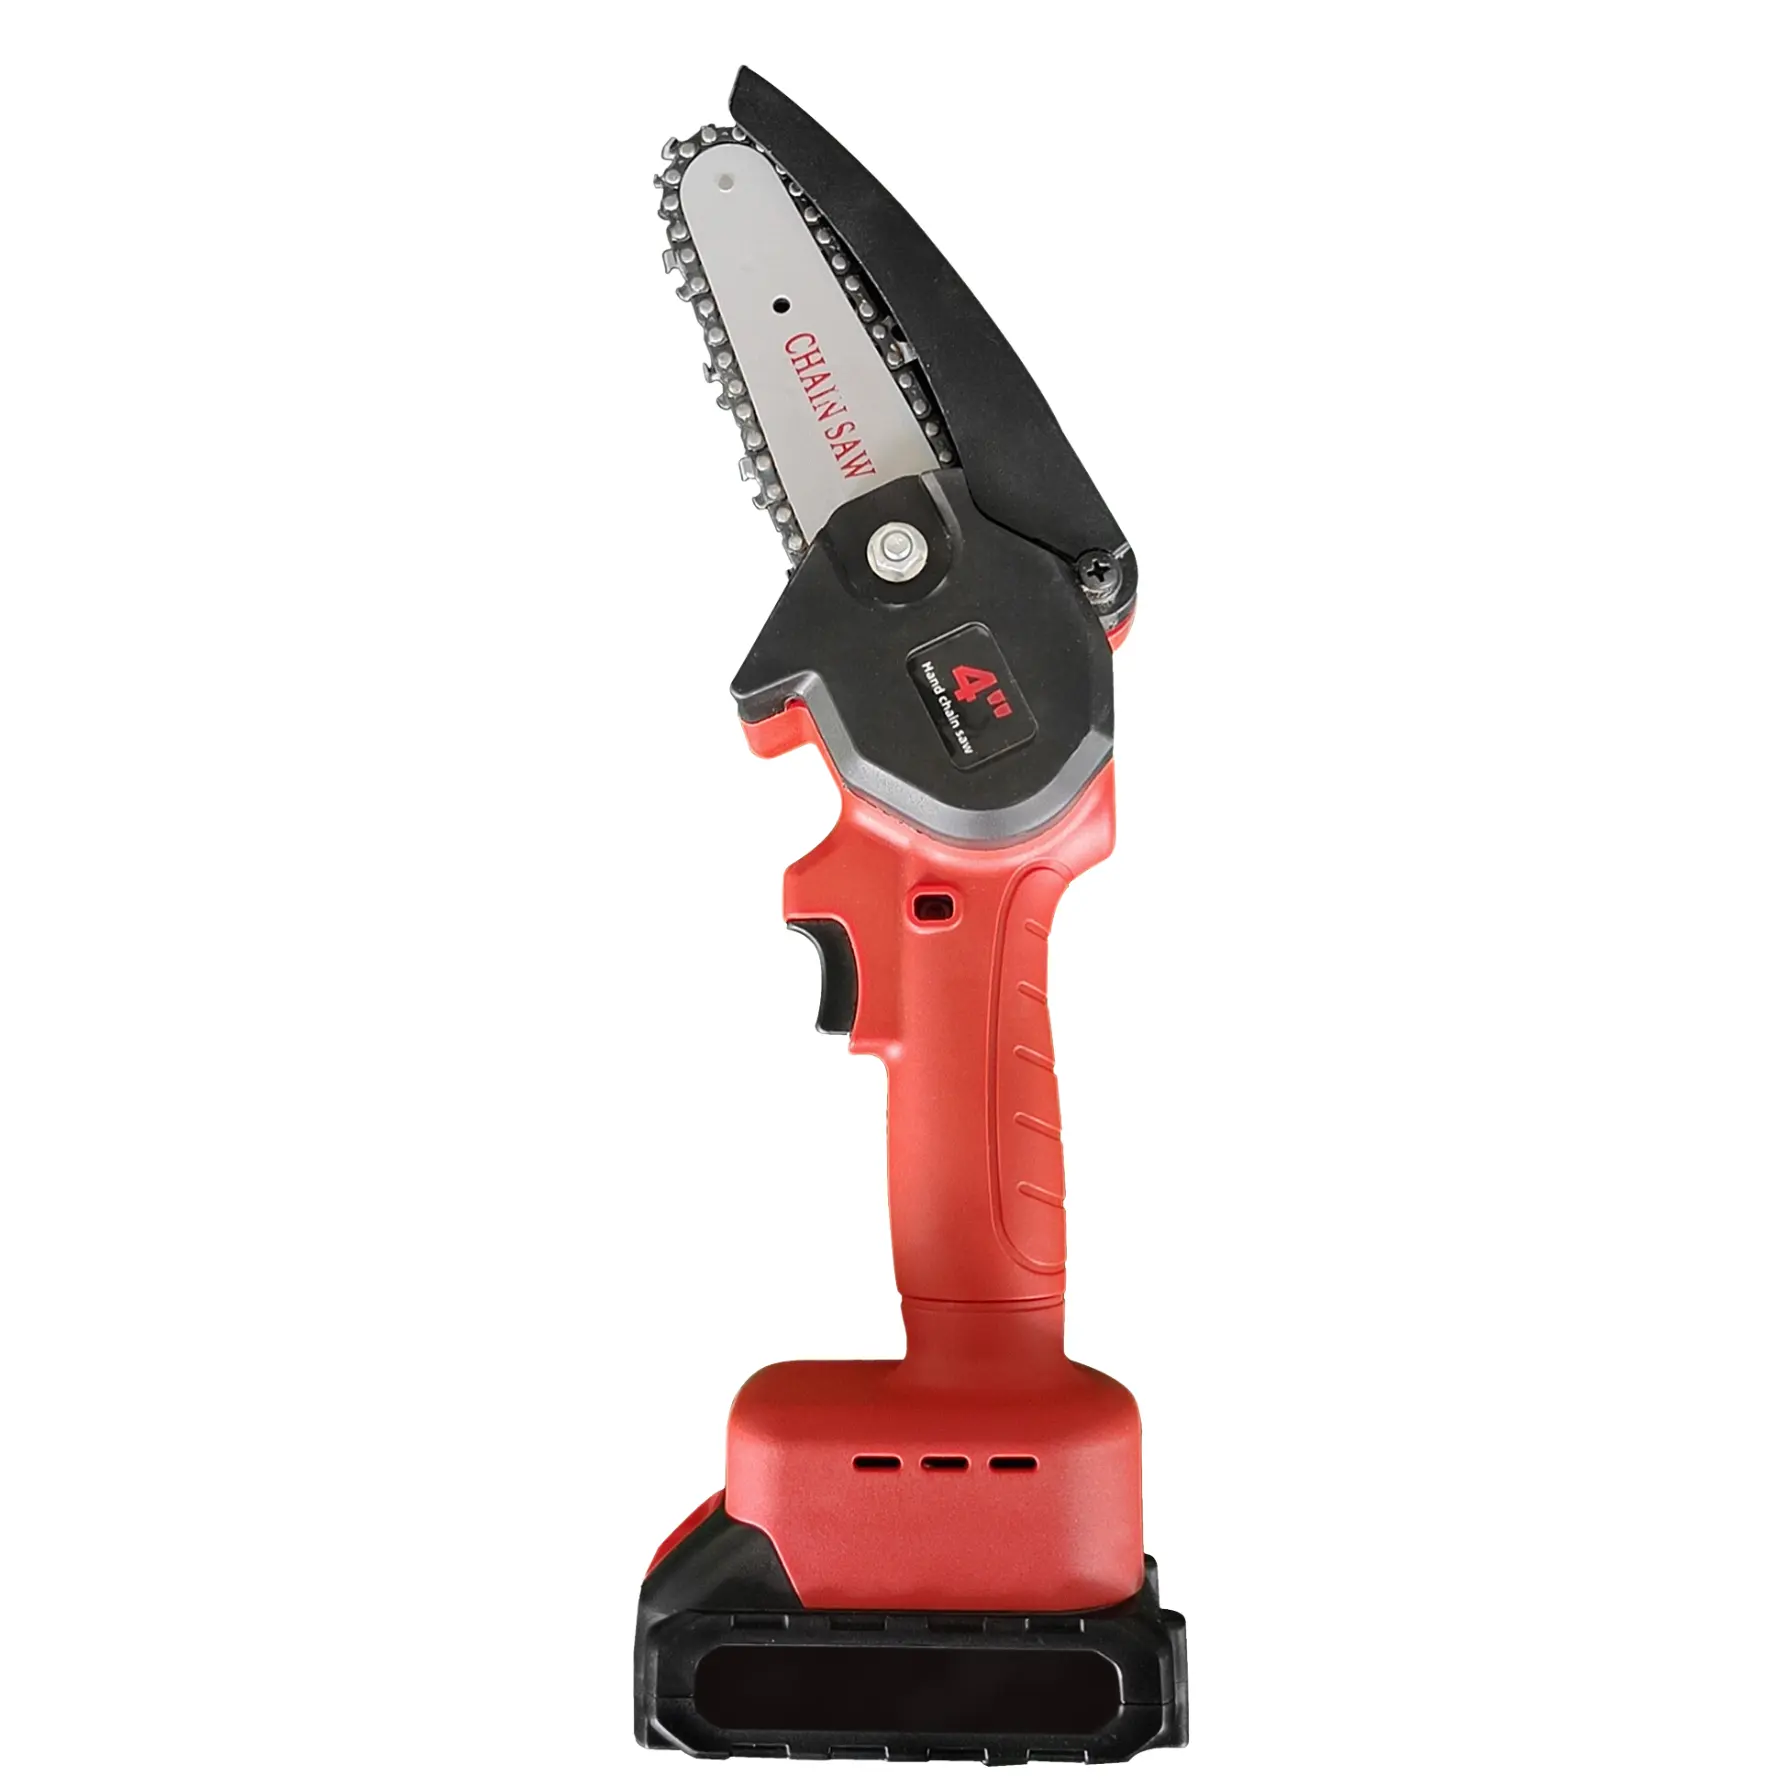 EUROPEAN COMPANY STOCK New Battery Powered Handheld Cordless Steel Motosega Chainsaw with Fast Shipping